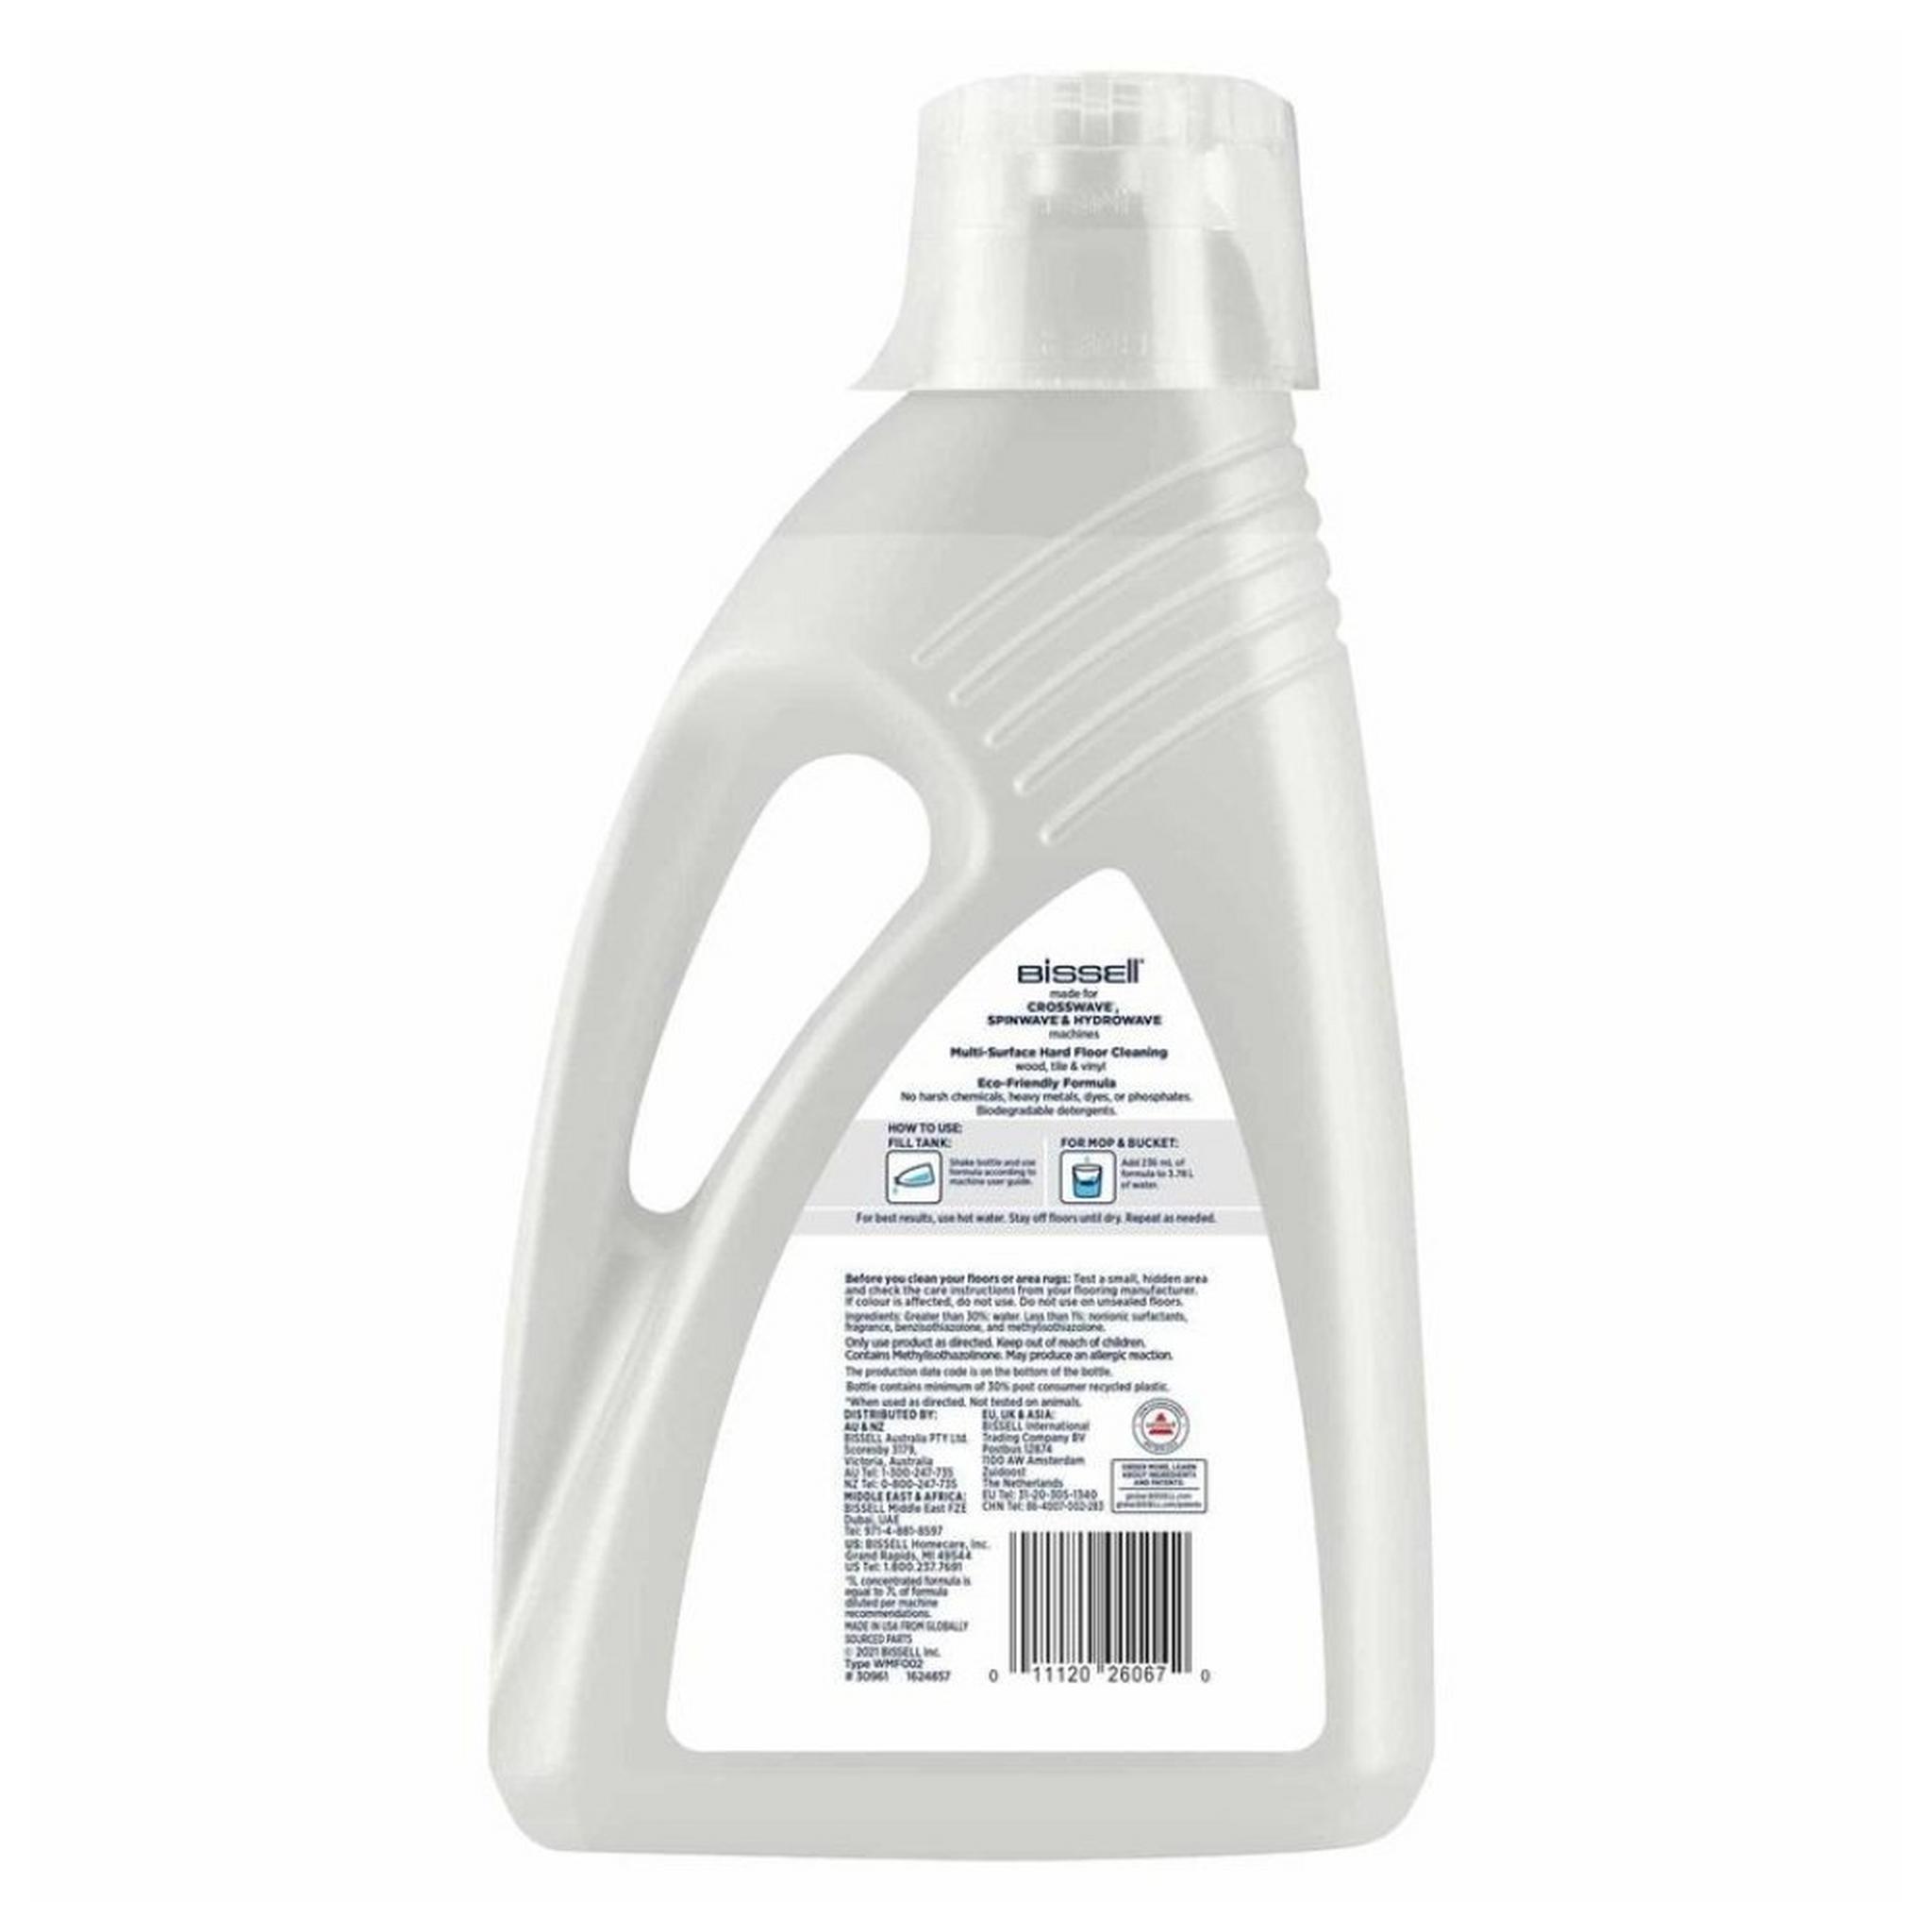 Bissell Natural Multi-Surface Floor Cleaning Solution 2L (30961)